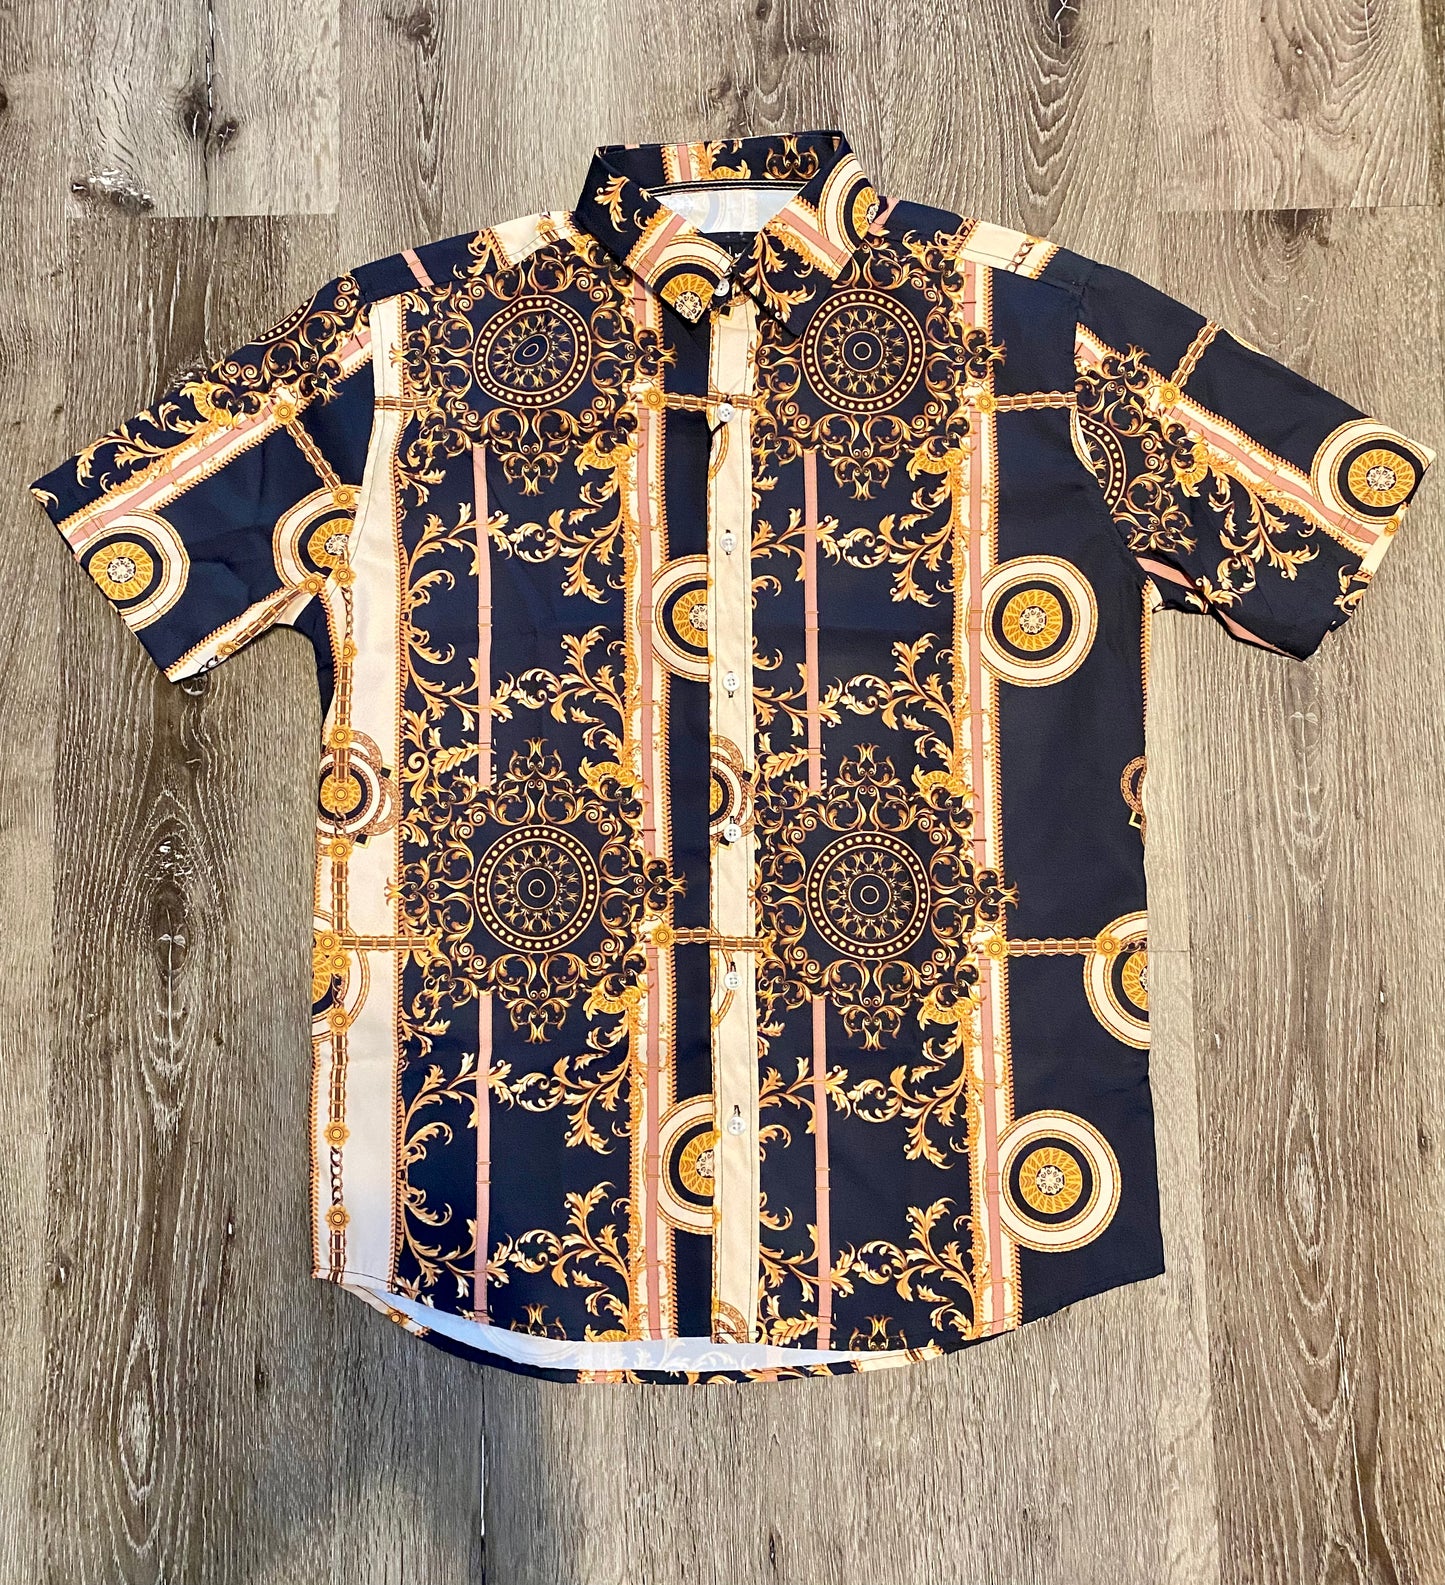 Men’s casual button up